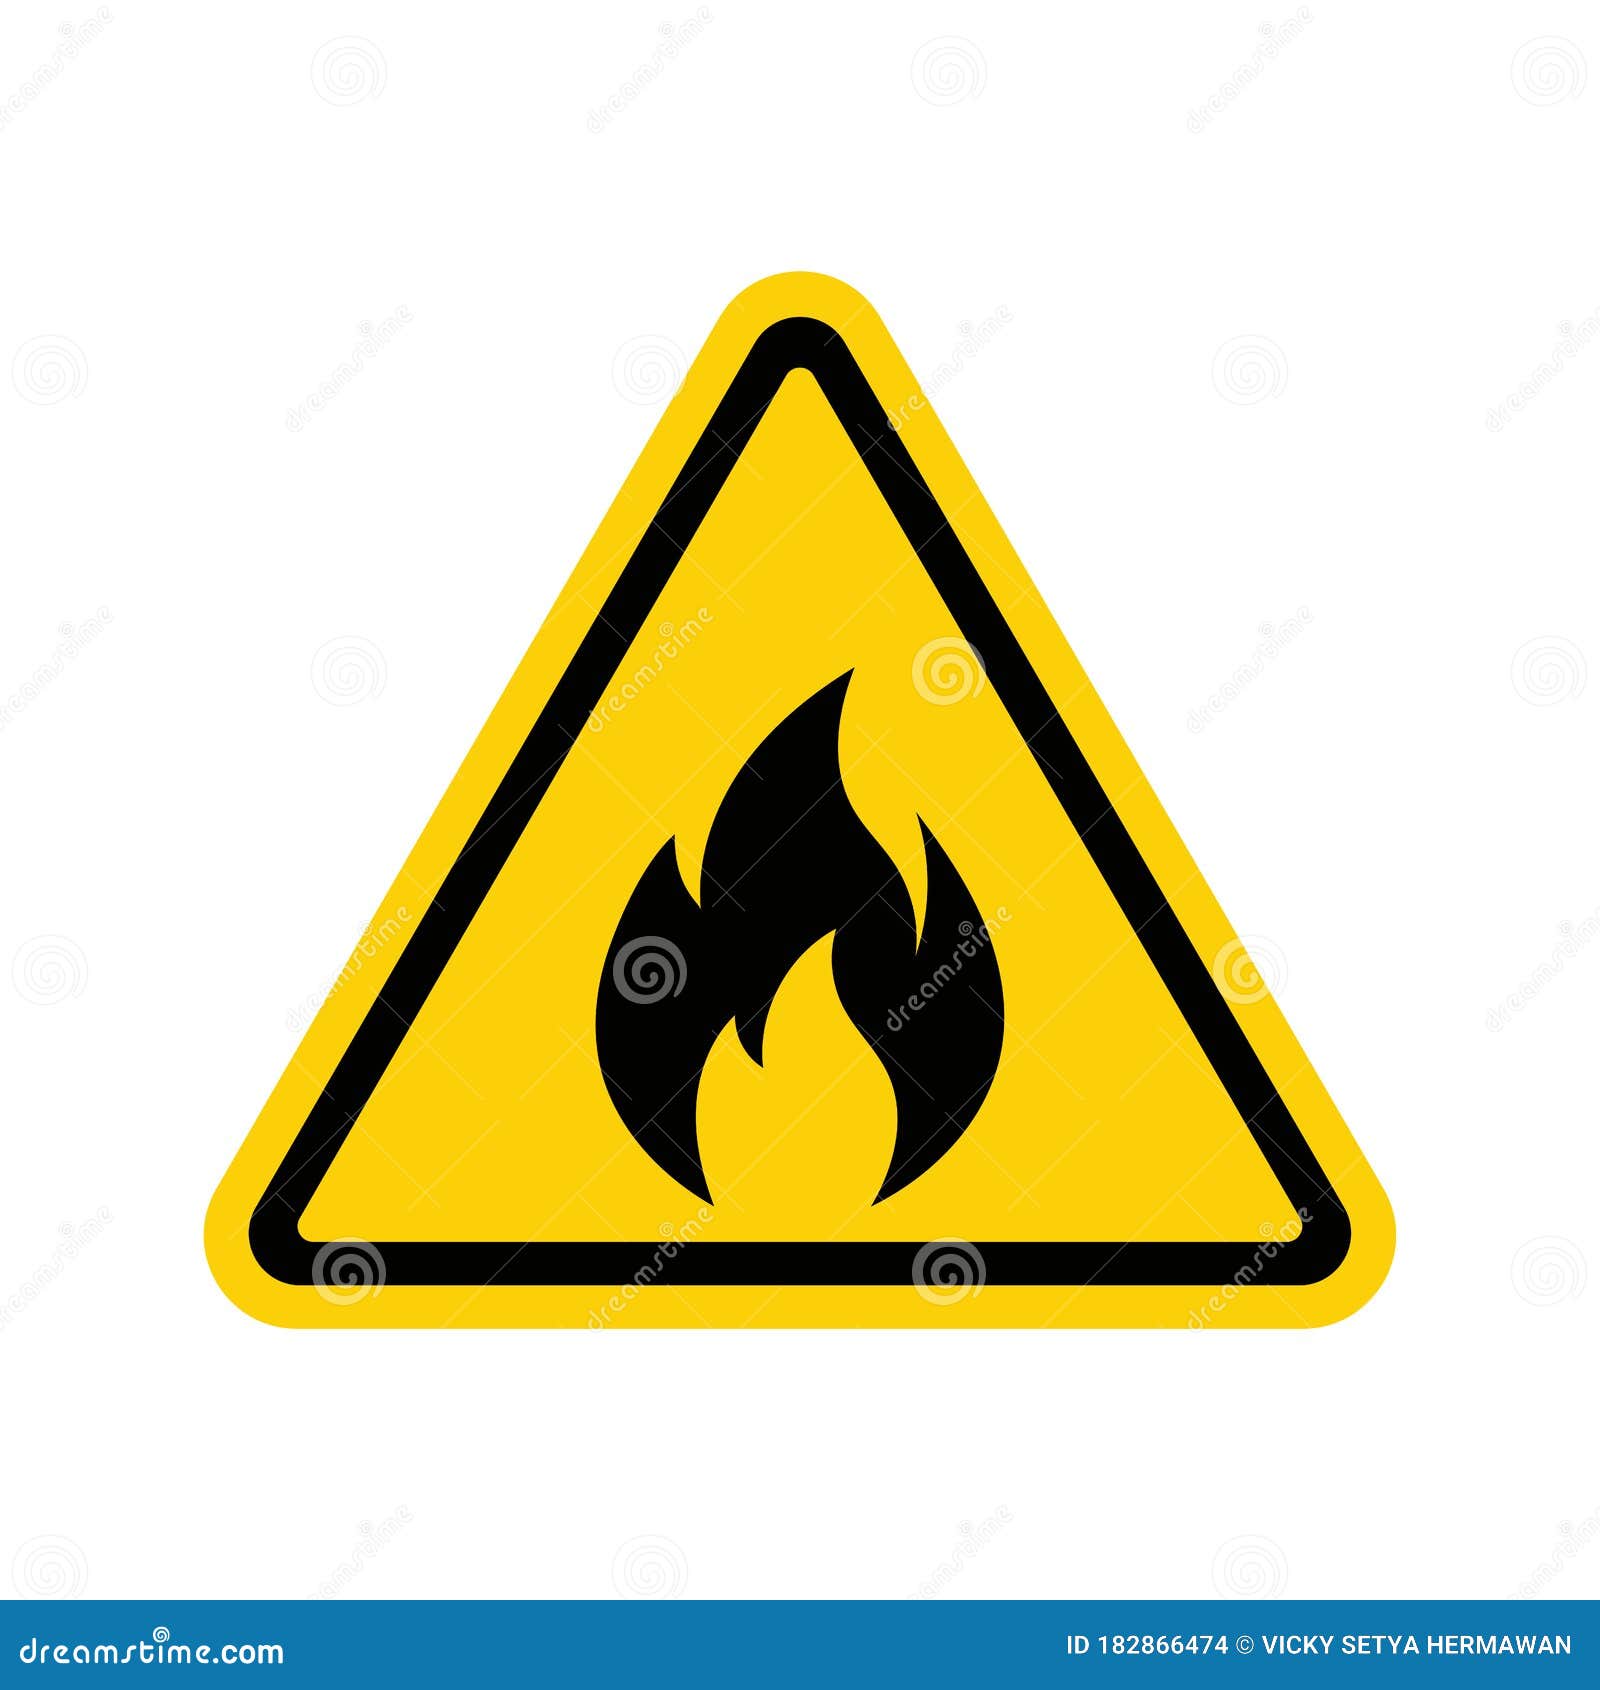 fire warning sign on white. fire warning sign in yellow triangle. flammable, inflammable substances icon. 